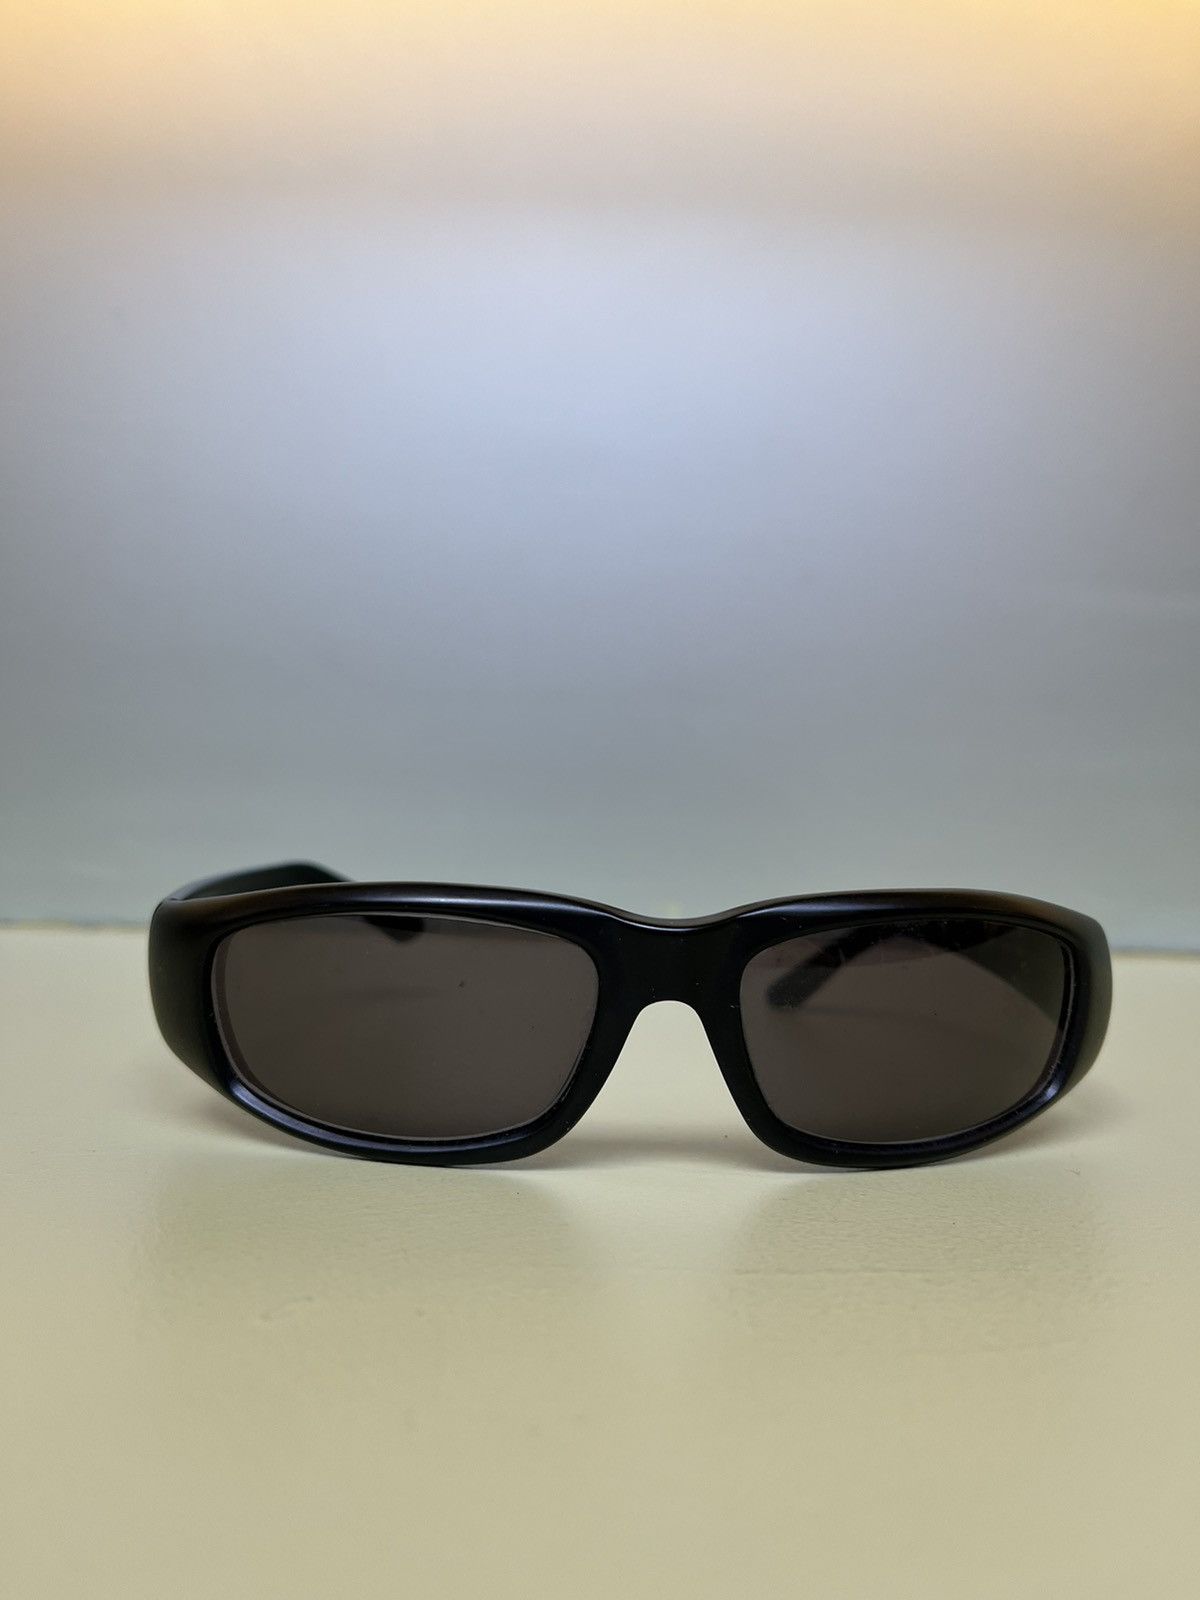 Gucci Gucci GG 1178 Black Tom Ford Vintage Sunglasses Size ONE SIZE - 2 Preview